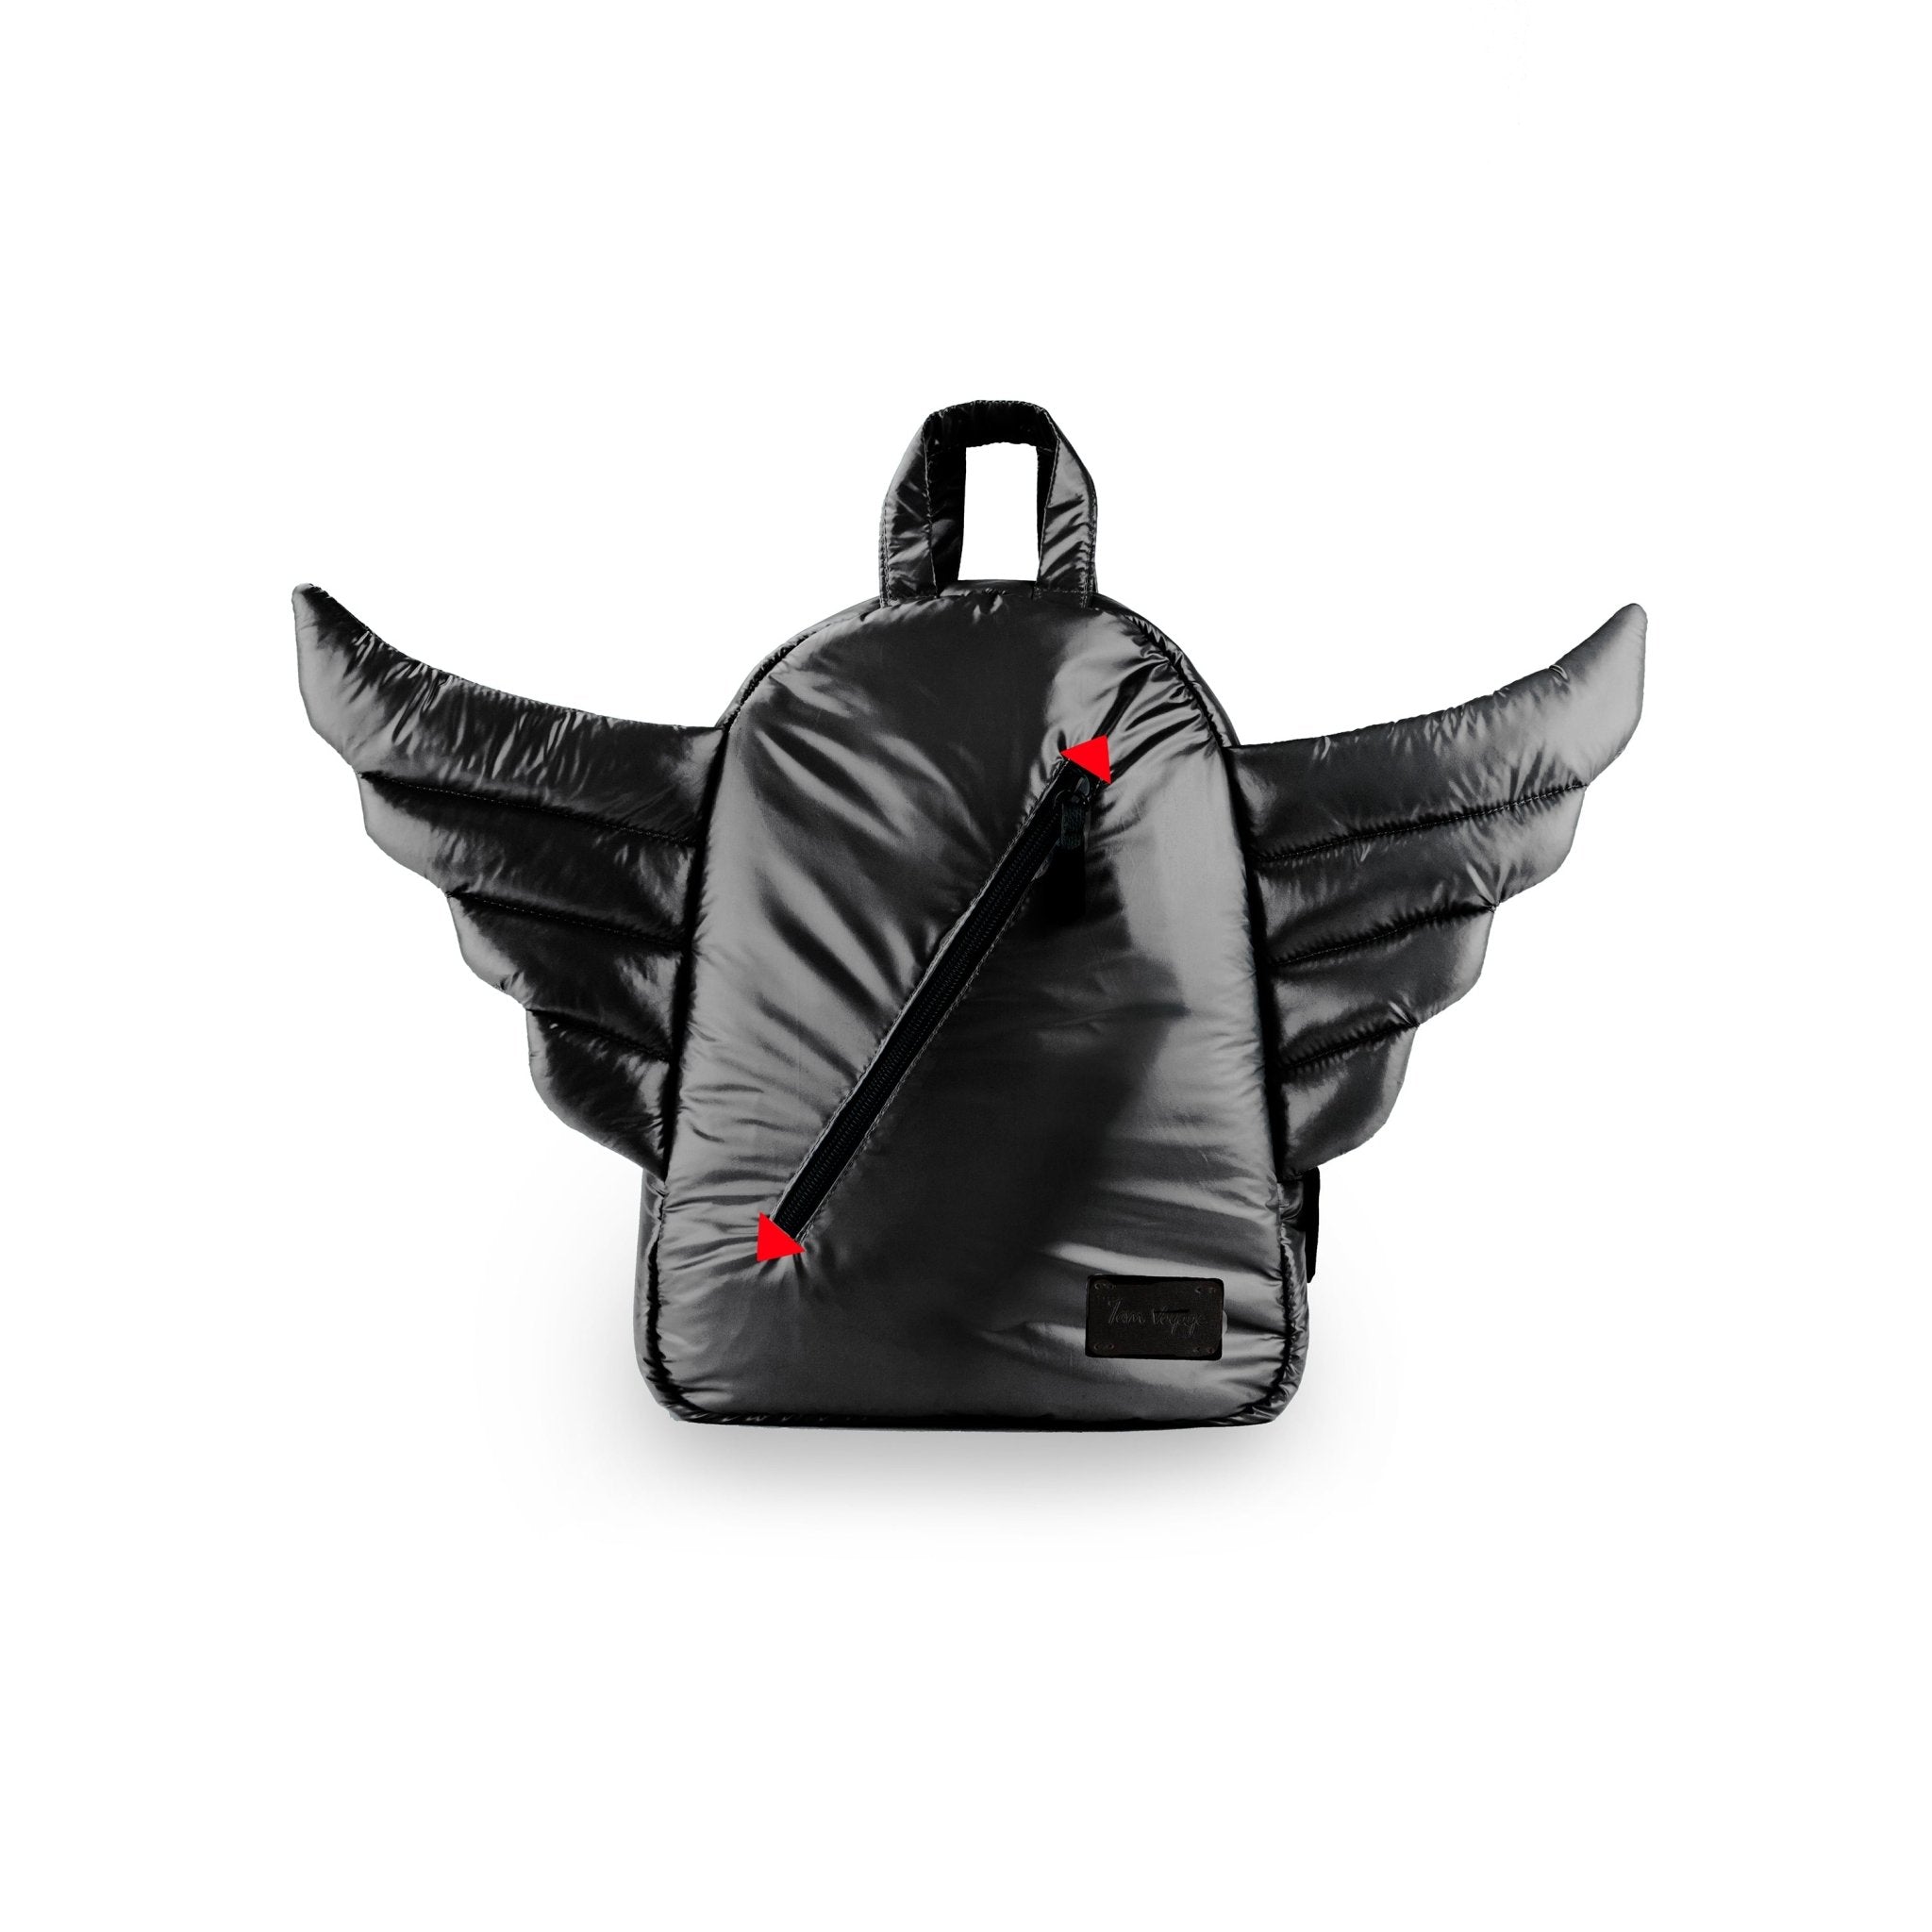 7AM Voyage Mini Wings Backpack - ANB Baby -7 AM backpack